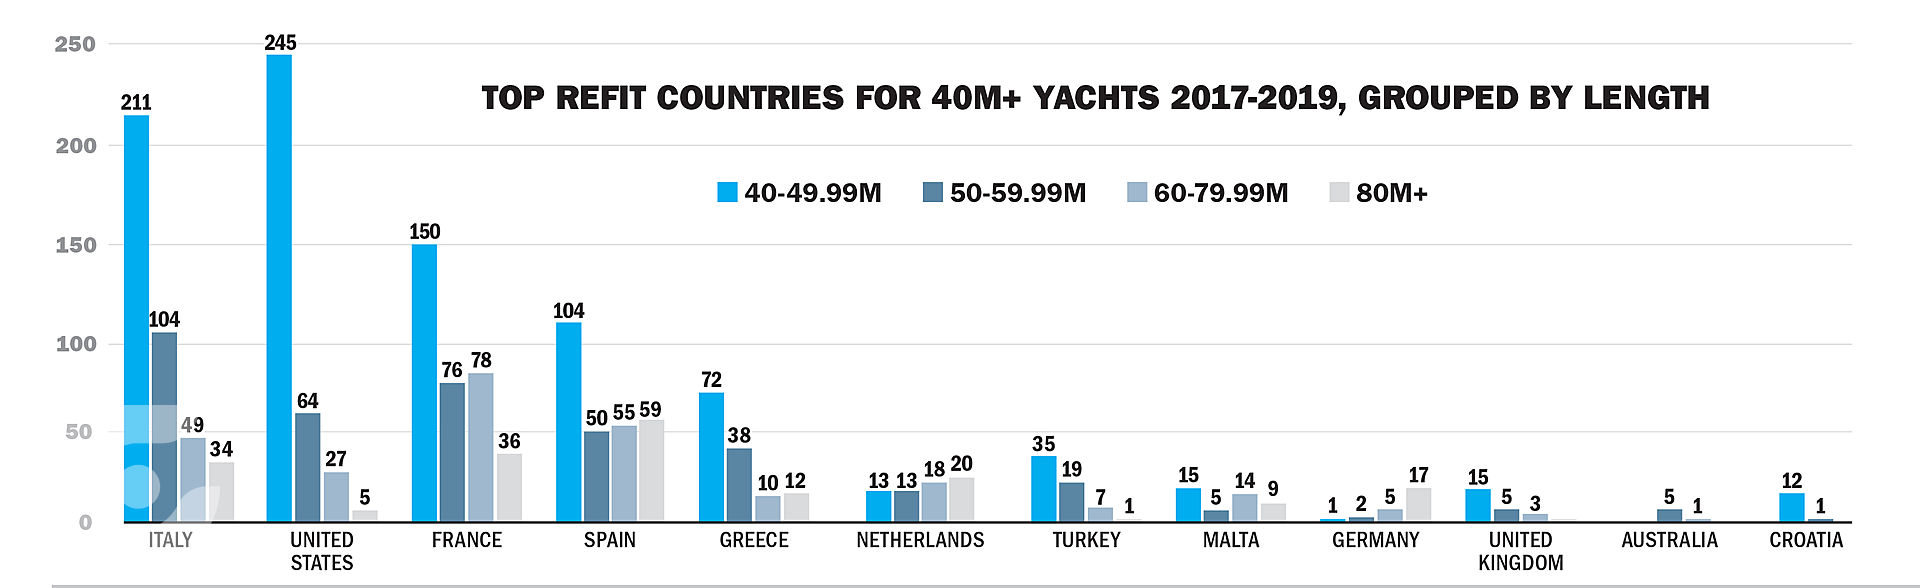 Top refit countries grouped by length group